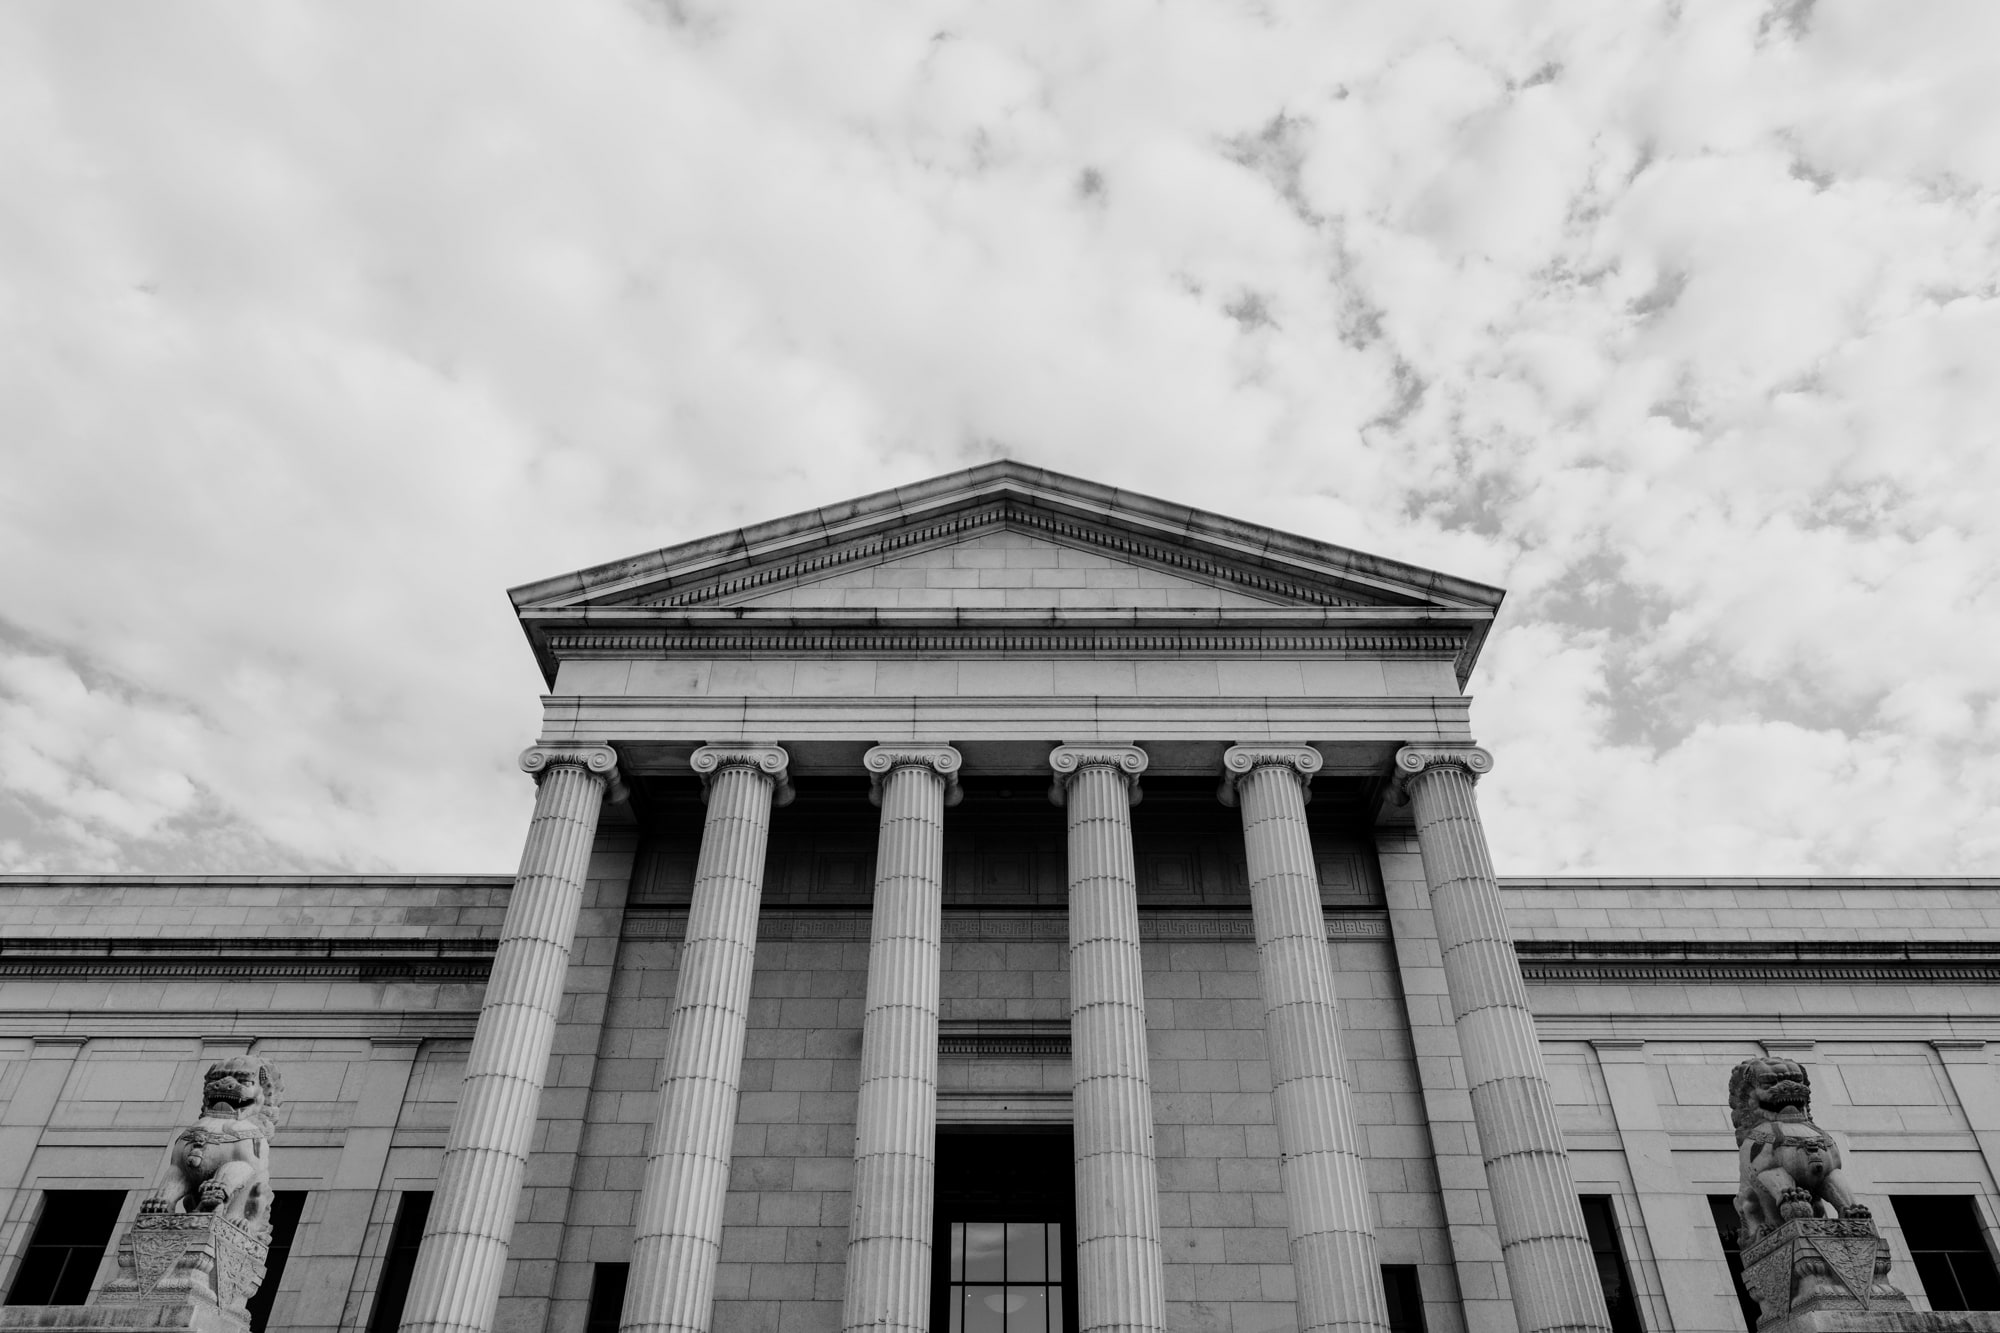 Outside of the entrance of the Minneapolis Institute of Art with impressive architecture and large columns.